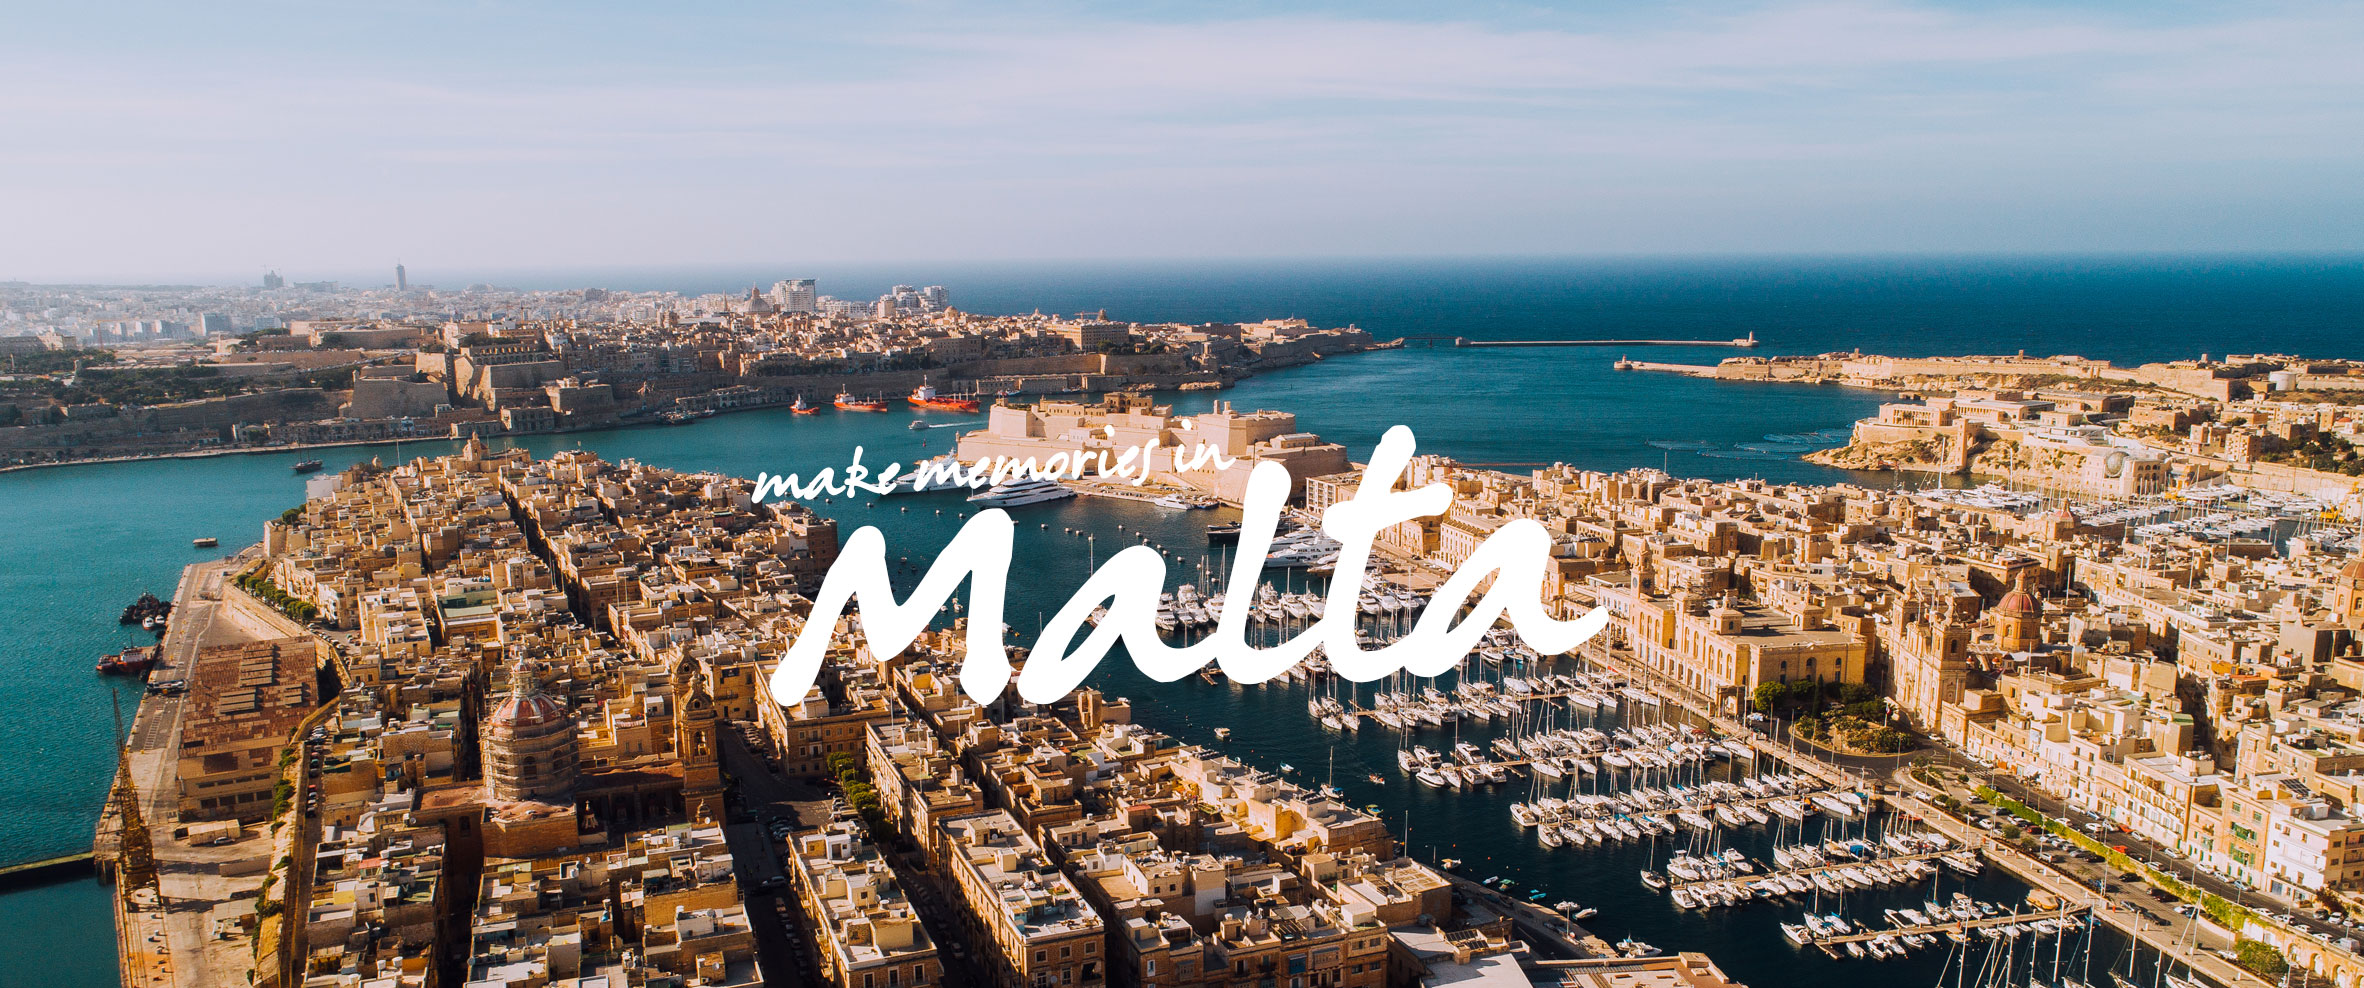 9+ Malta All Inclusive Holiday Hotels (with Best Prices) for any budget